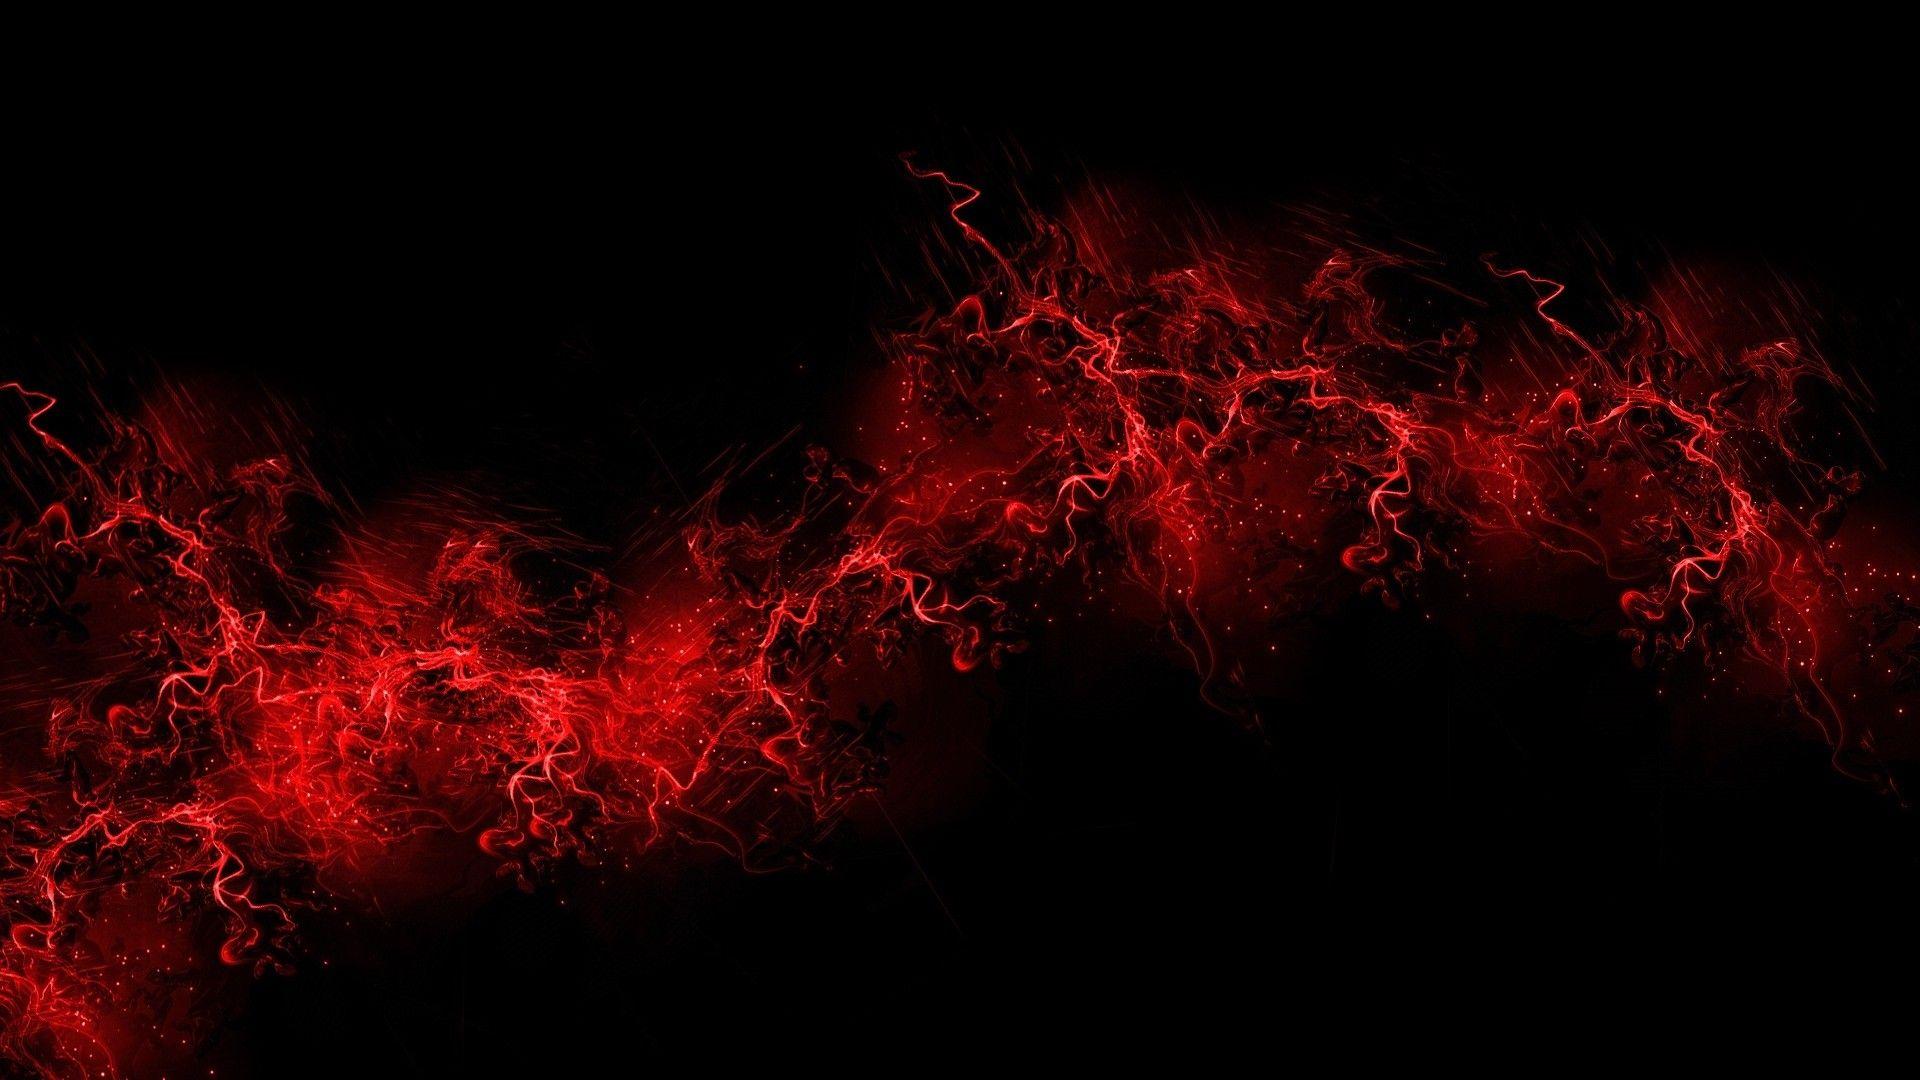 Black and Red 1080p Wallpaper